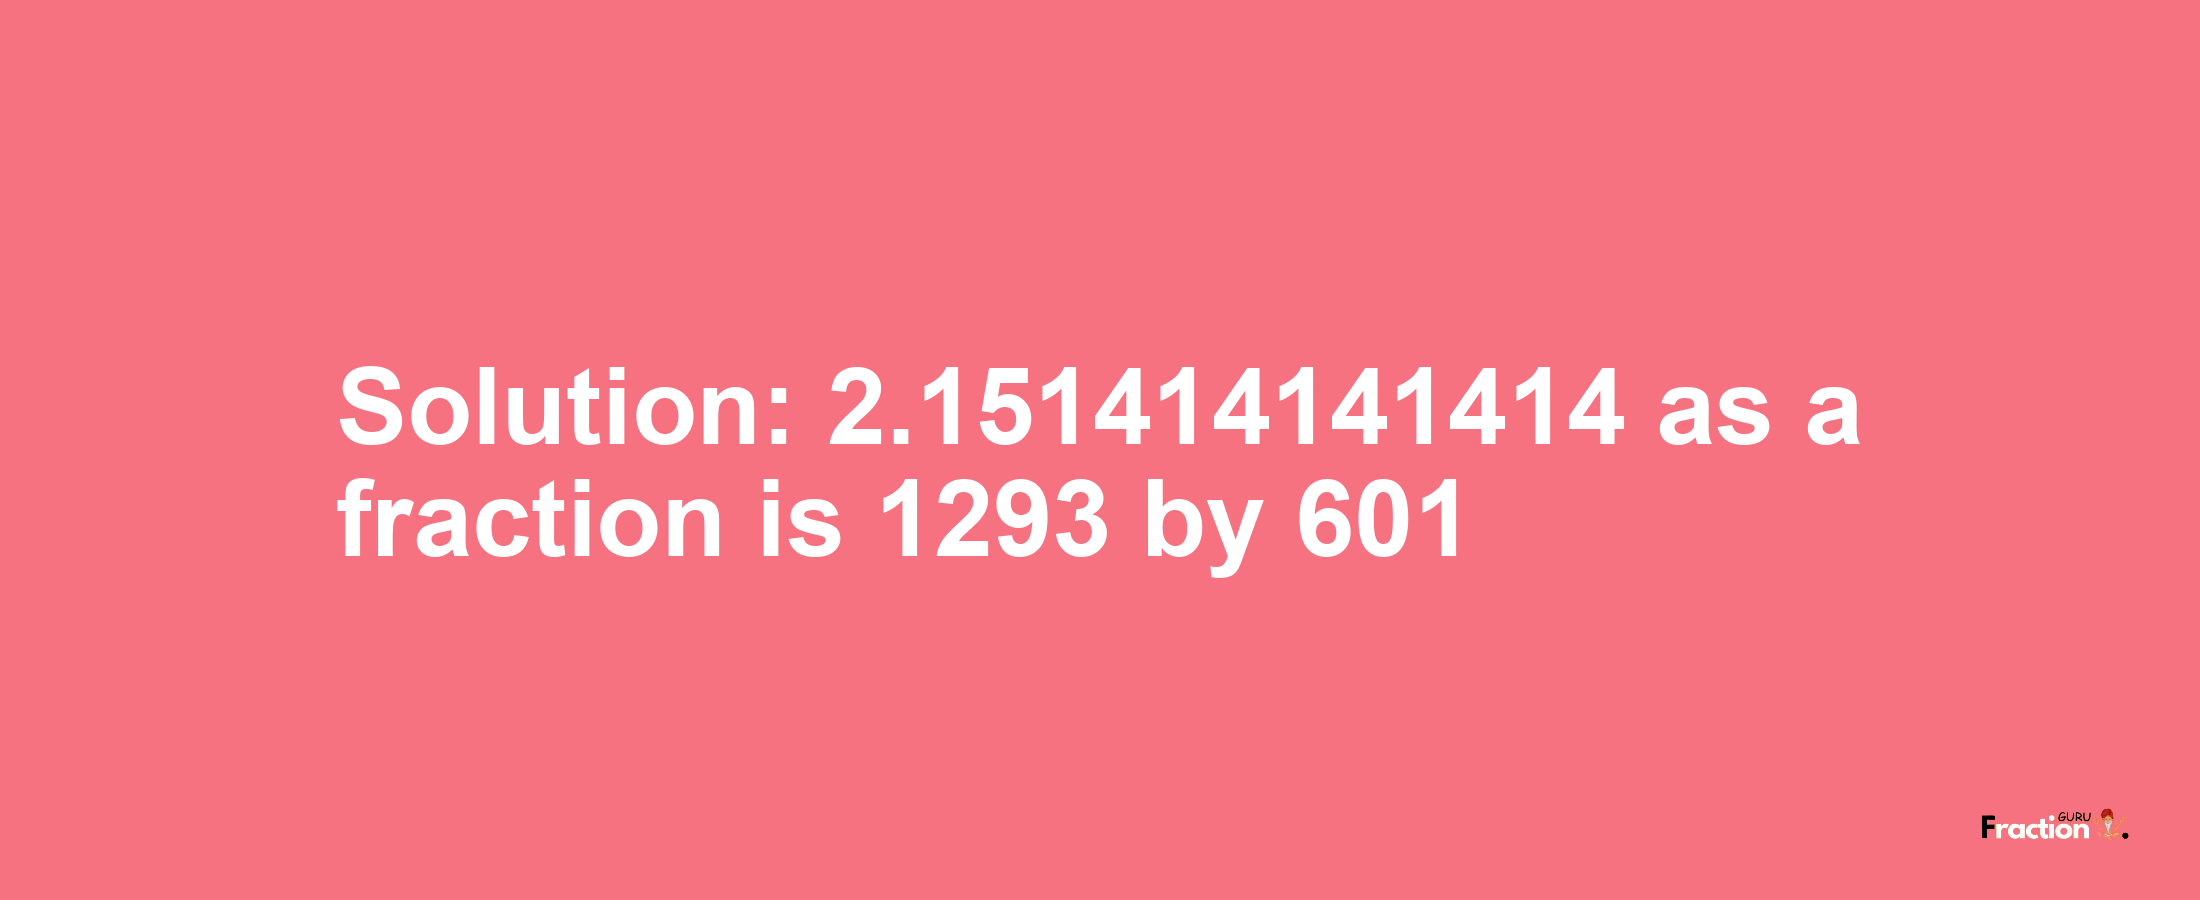 Solution:2.151414141414 as a fraction is 1293/601